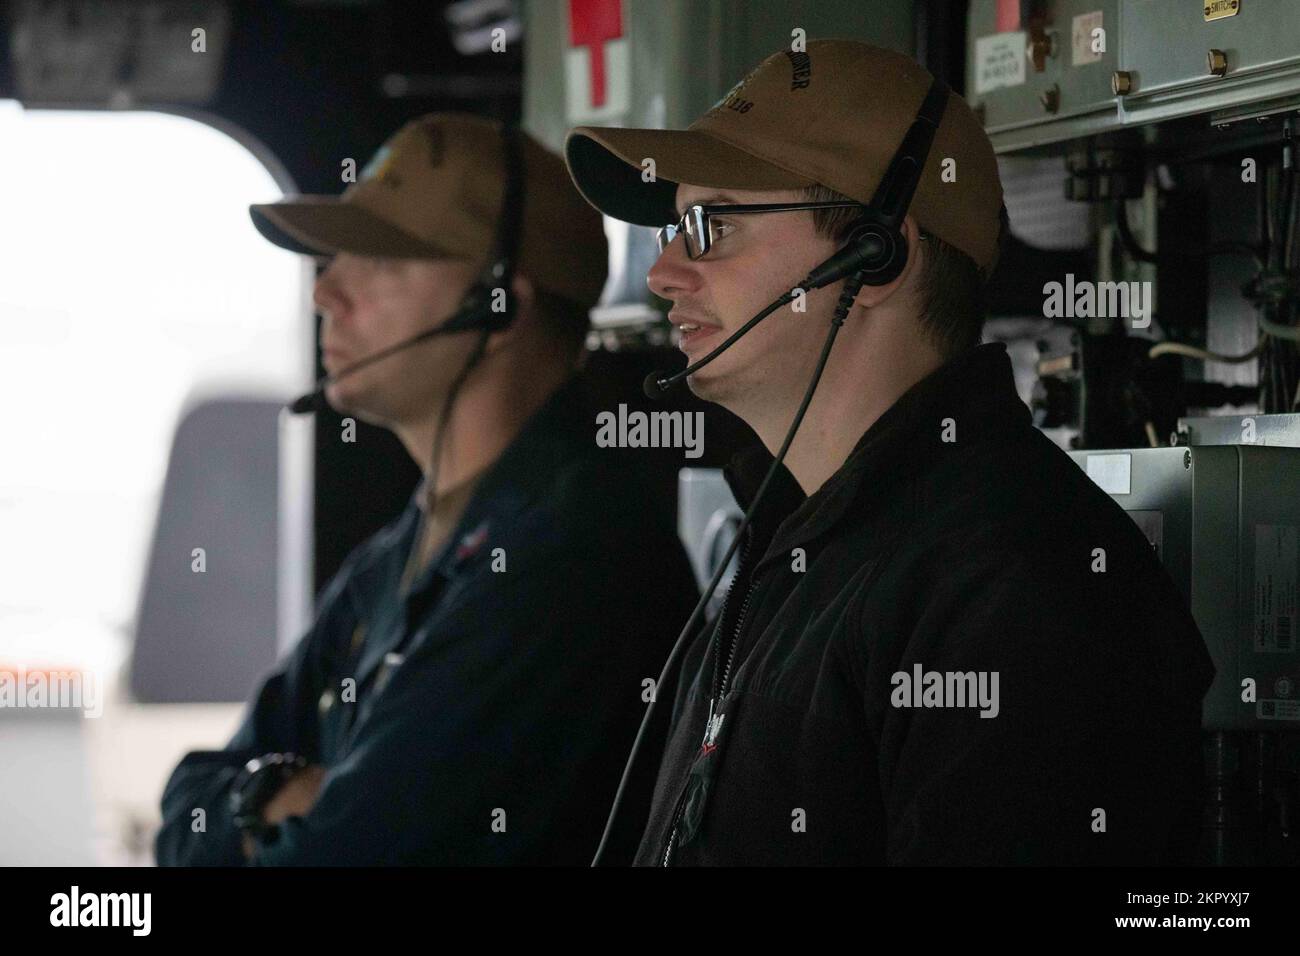 Master-at-Arms 1st Class Sean Hiller, left and Gunner’s Mate 3rd Class Thomas Bishop, right, stand watch in the pilothouse of the Arleigh Burke-class guided missile destroyer USS Thomas Hudner (DDG 116) as part of the Gerald R. Ford Carrier Strike Group, on Nov. 4, 2022. The first-in-class aircraft carrier USS Gerald R. Ford (CVN 78) is on its inaugural deployment conducting training and operations alongside NATO allies and partners to enhance integration the U.S. Navy’s commitment to a peaceful, stable and conflict-free Atlantic region. Stock Photo